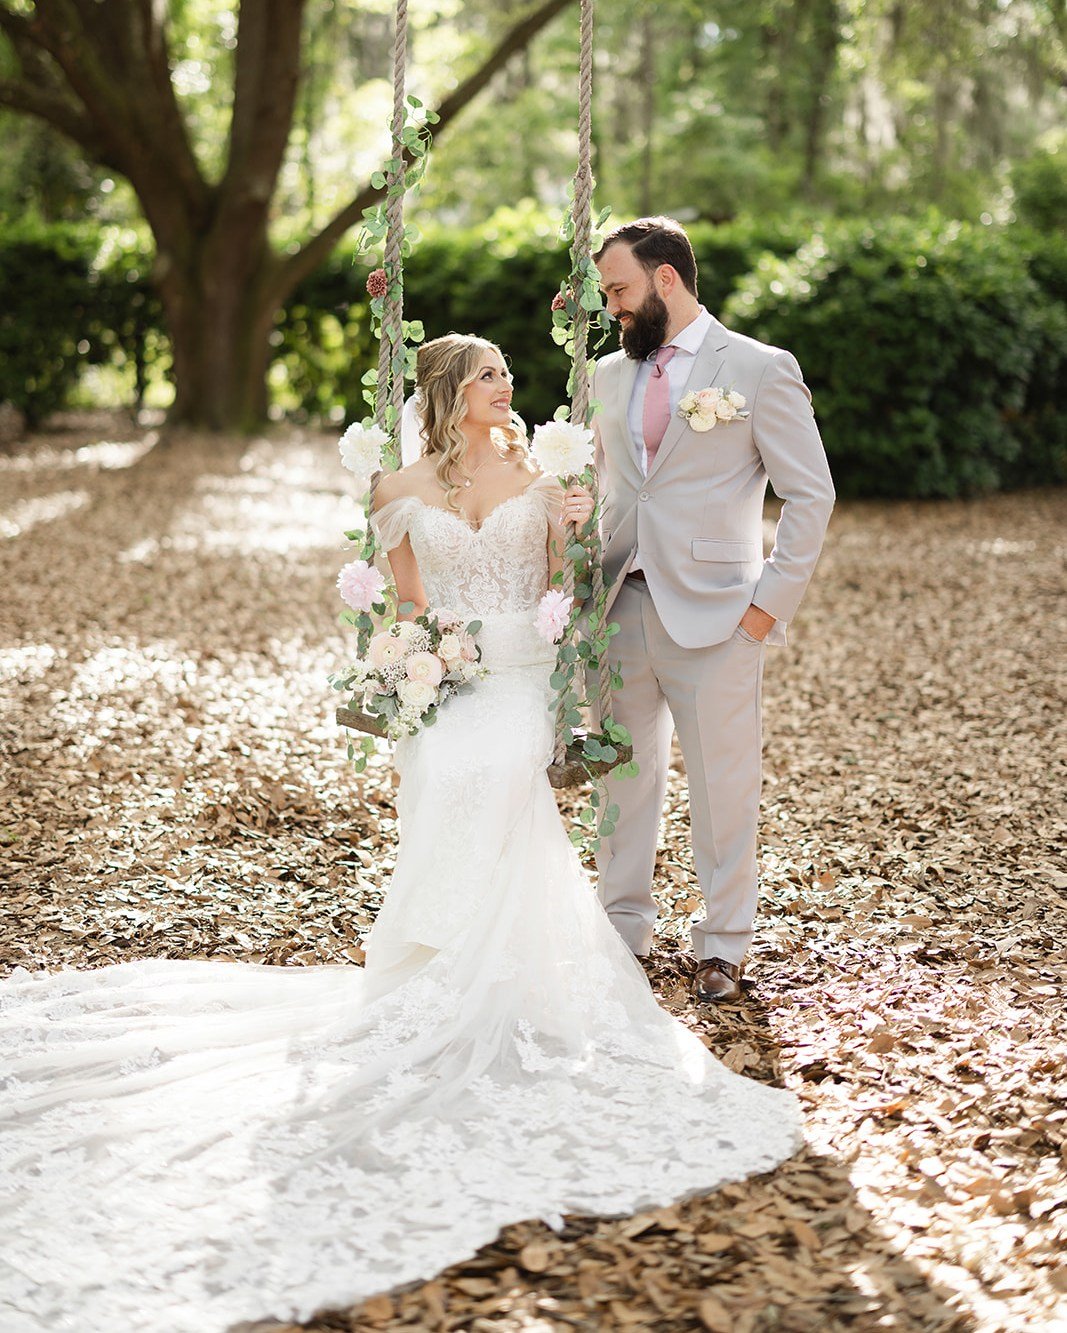 Sarah's amazing dress had the perfect train! Don't you love how it drapes off our swing? So romantic! 

(Check out our previous post to see the train during the wedding ceremony!)

@brookeimages
@coastalcoordinating

#weddingday #brideandgroom #newly